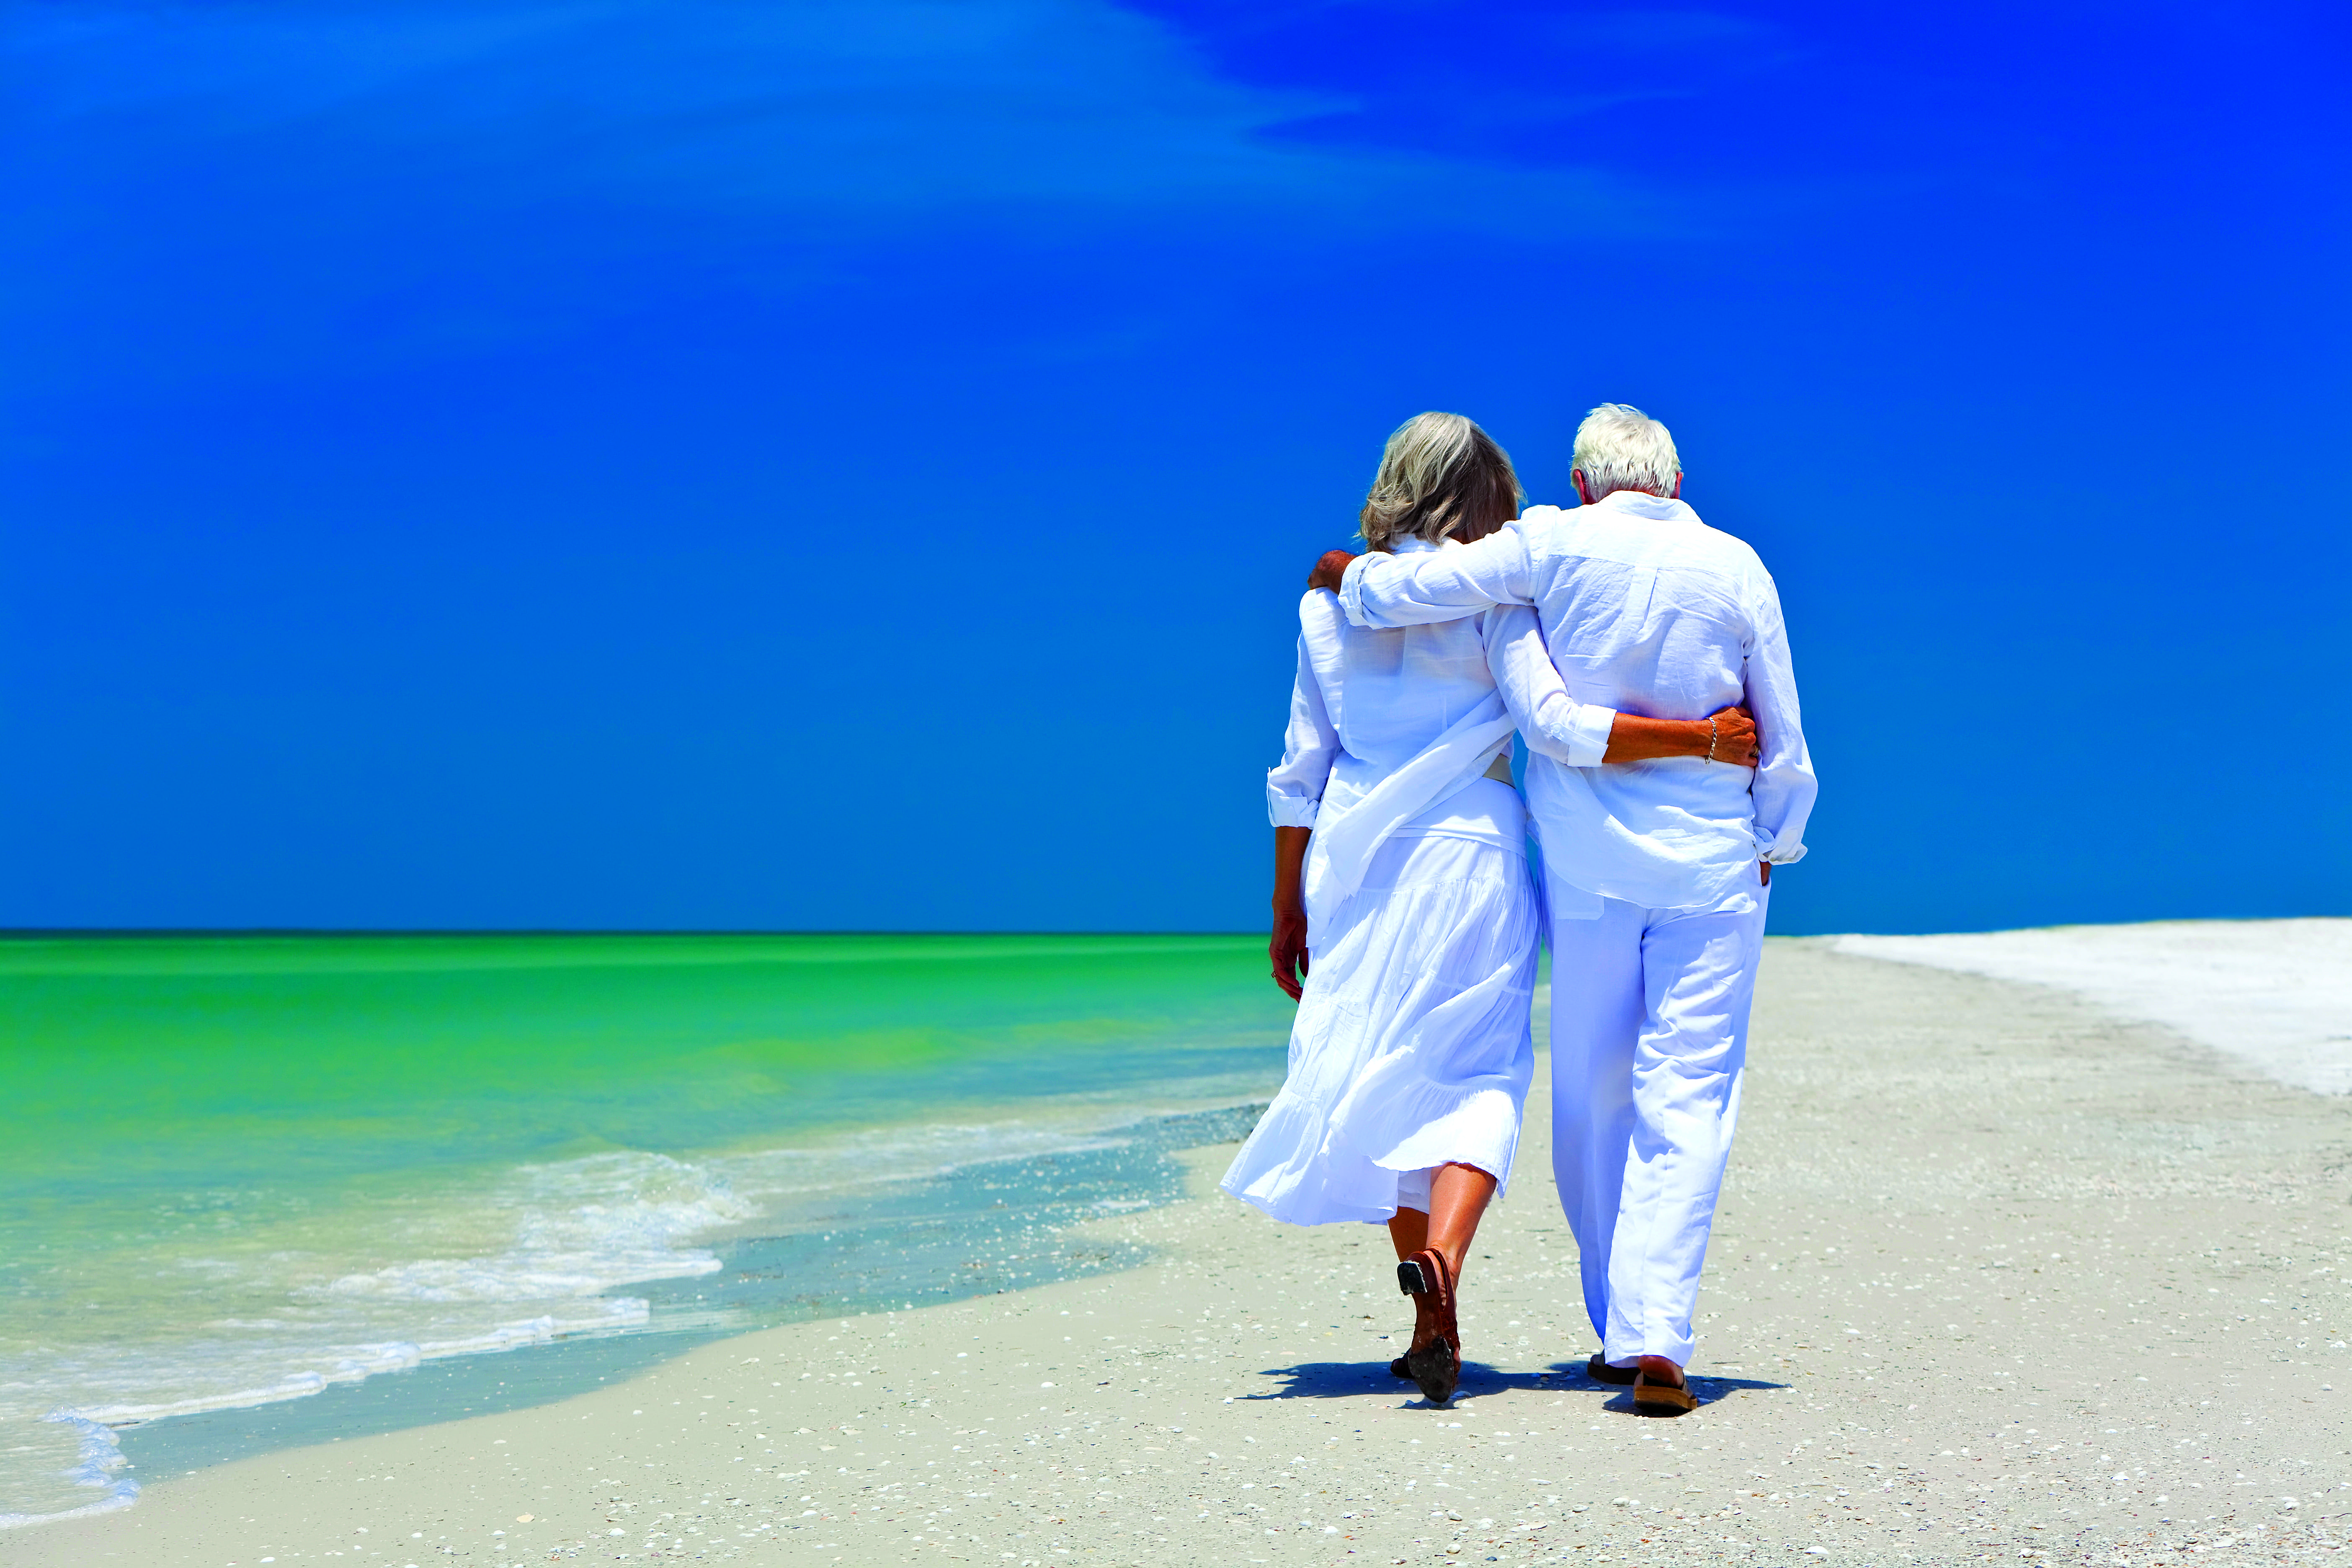 Man and woman walking down beautiful beach together arm in arm